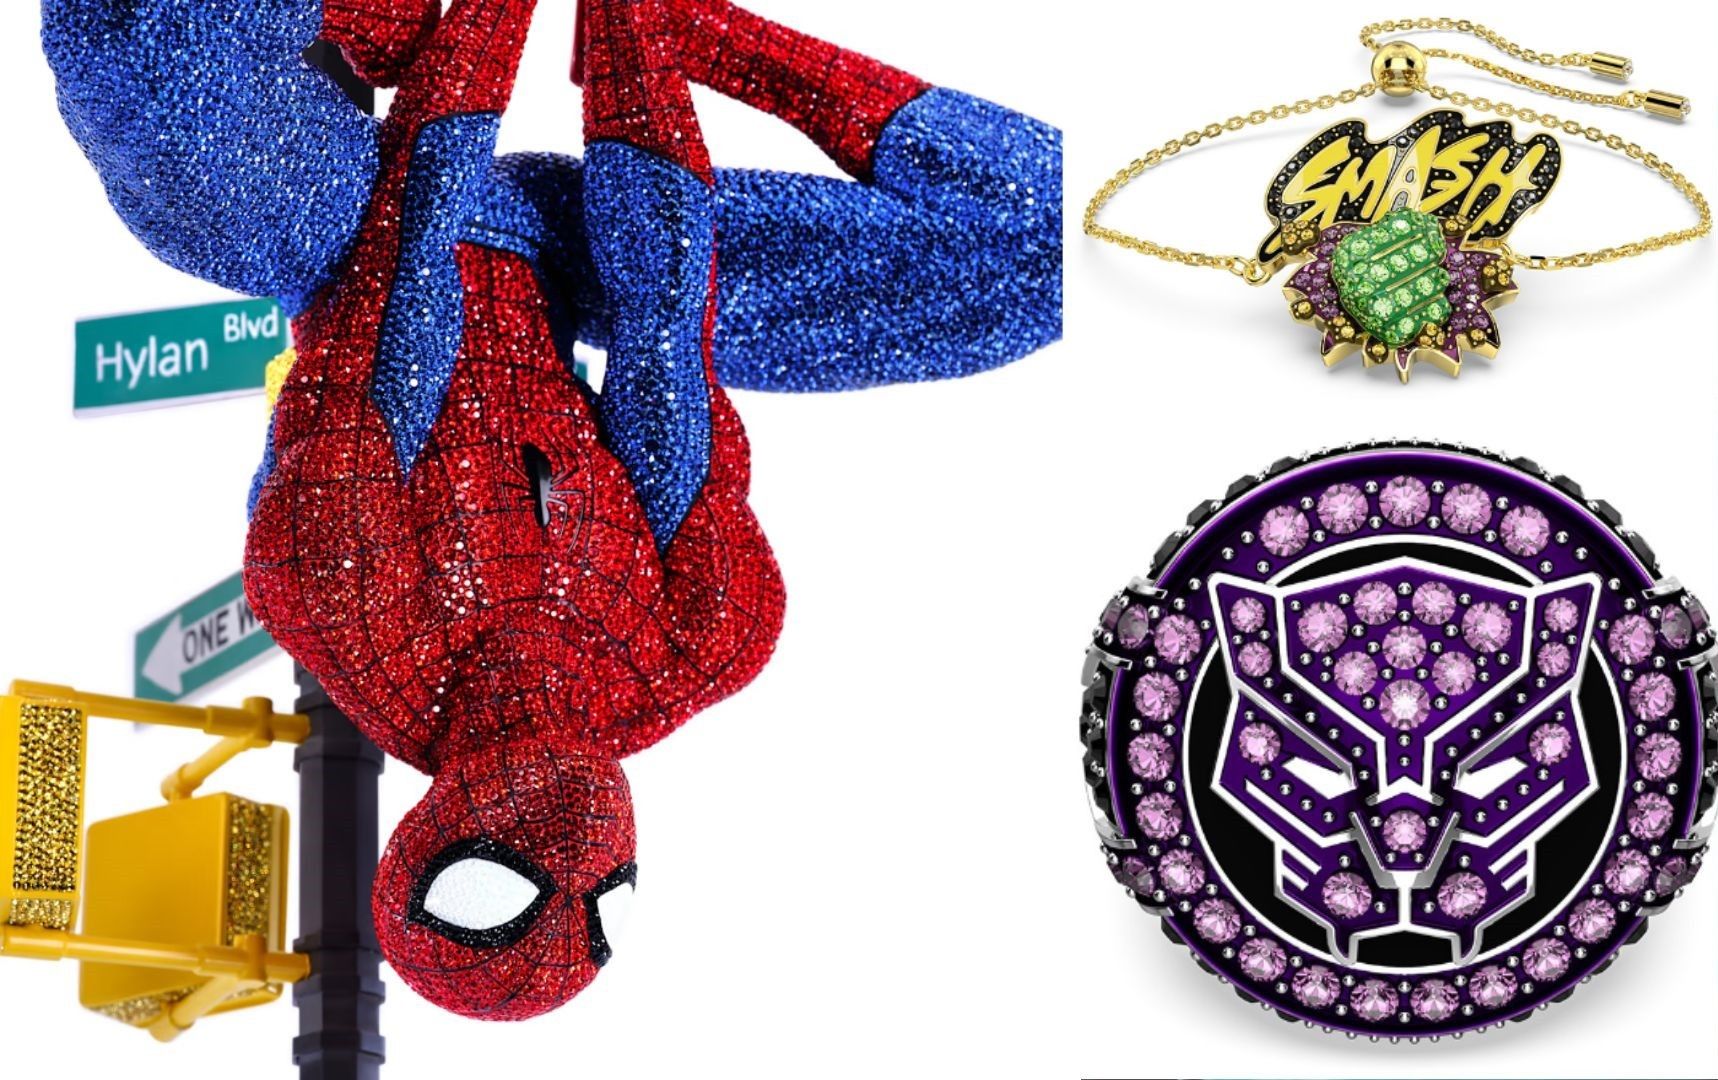 Marvel teams up with Swarovski for superhero jewelry, collectibles